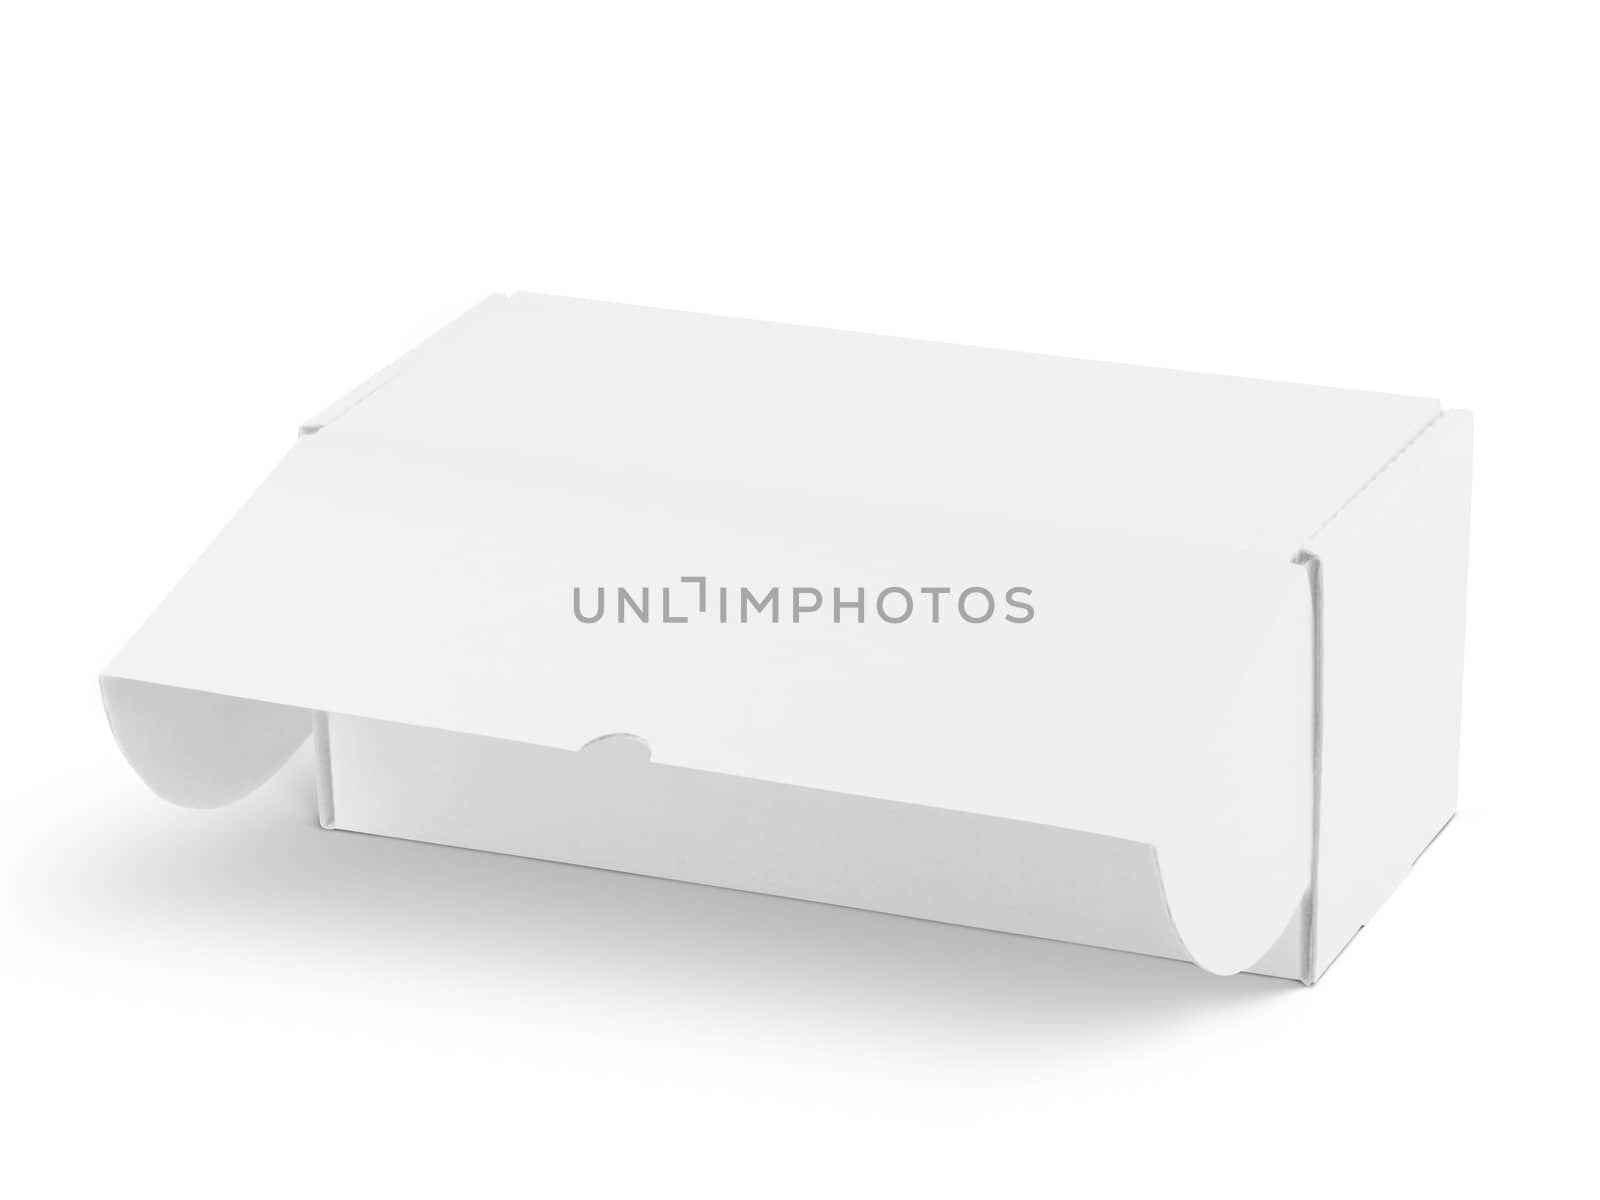 Isolated white packaging box for branding mockup by cougarsan